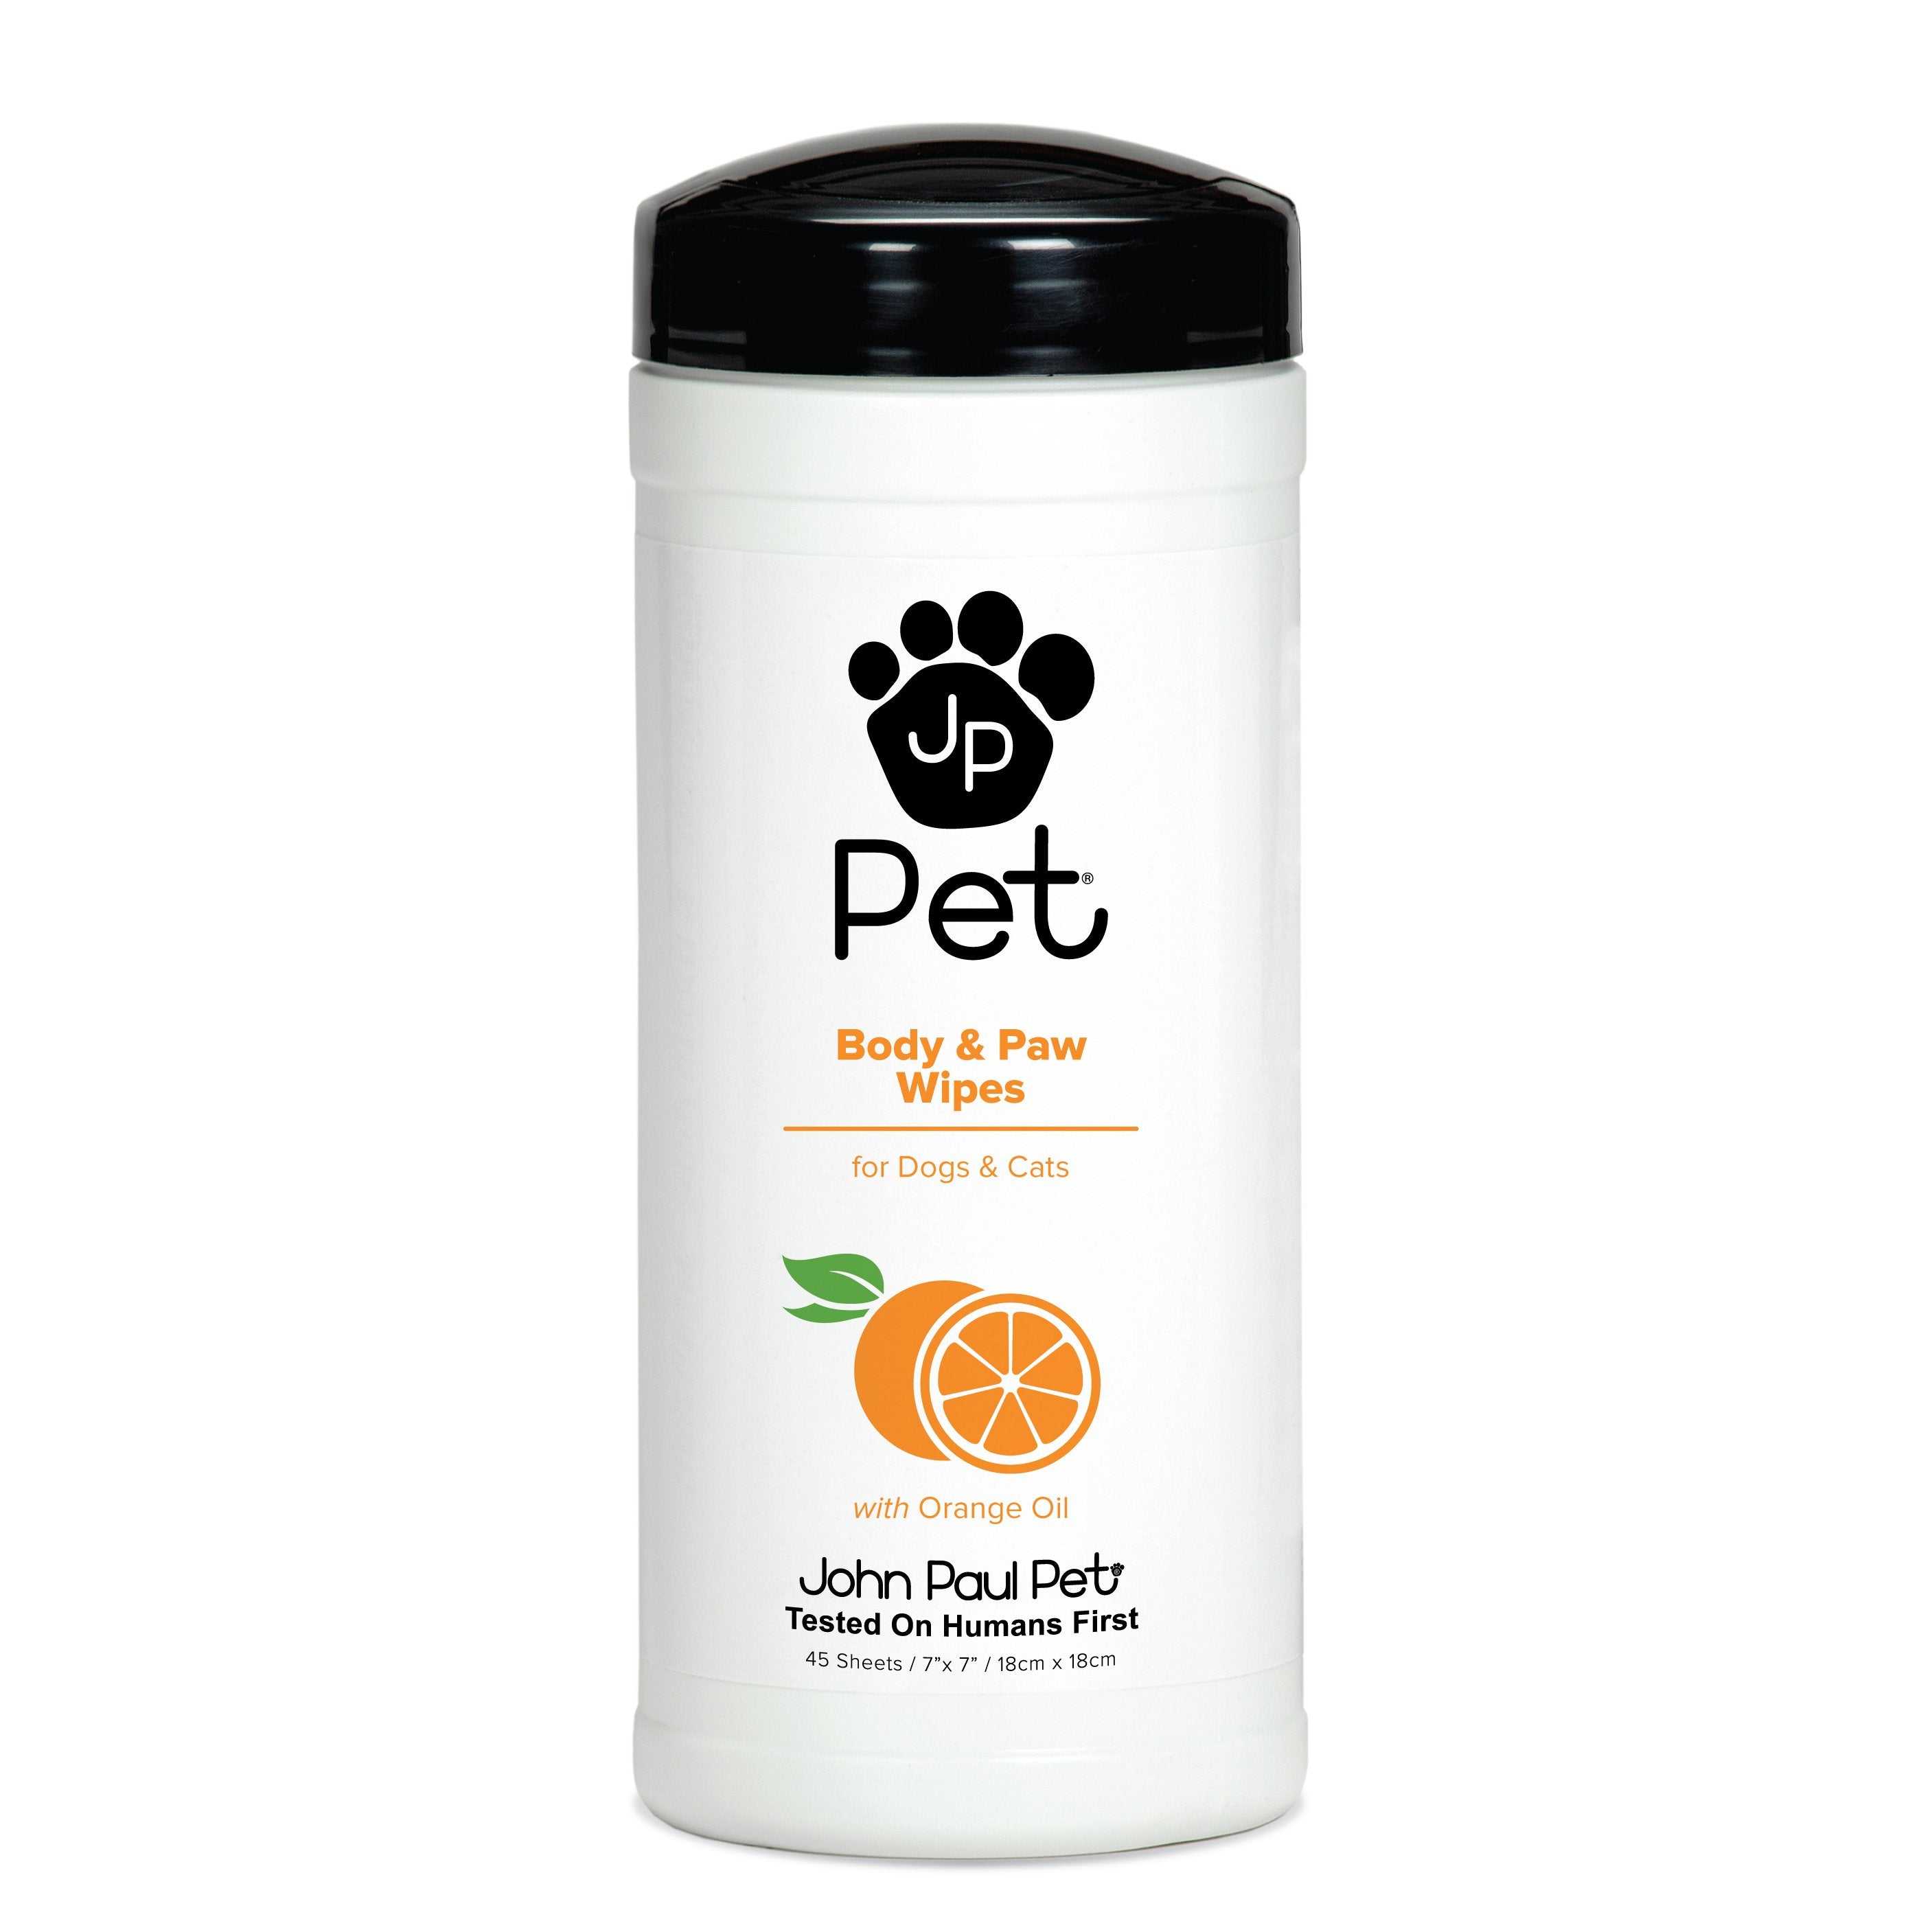 JP Pet Full Body and Paw Wipes - 45 sheets